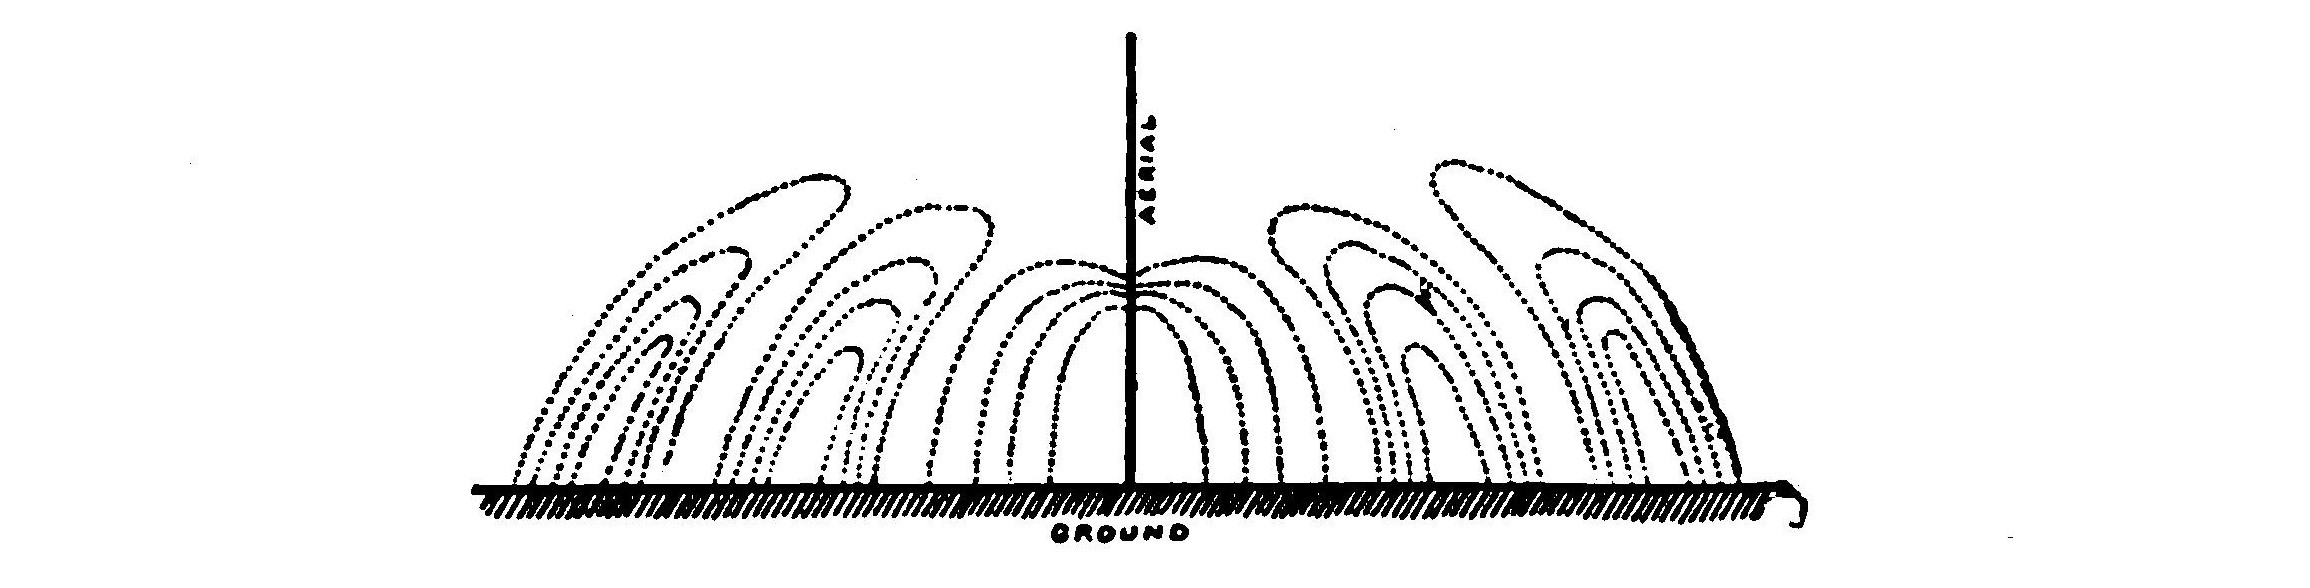 FIG. 8. If a cross section of the aerial and atmosphere could be made in the same manner that an apple is sliced with a knife and the waves held stationary, they would appear as above.